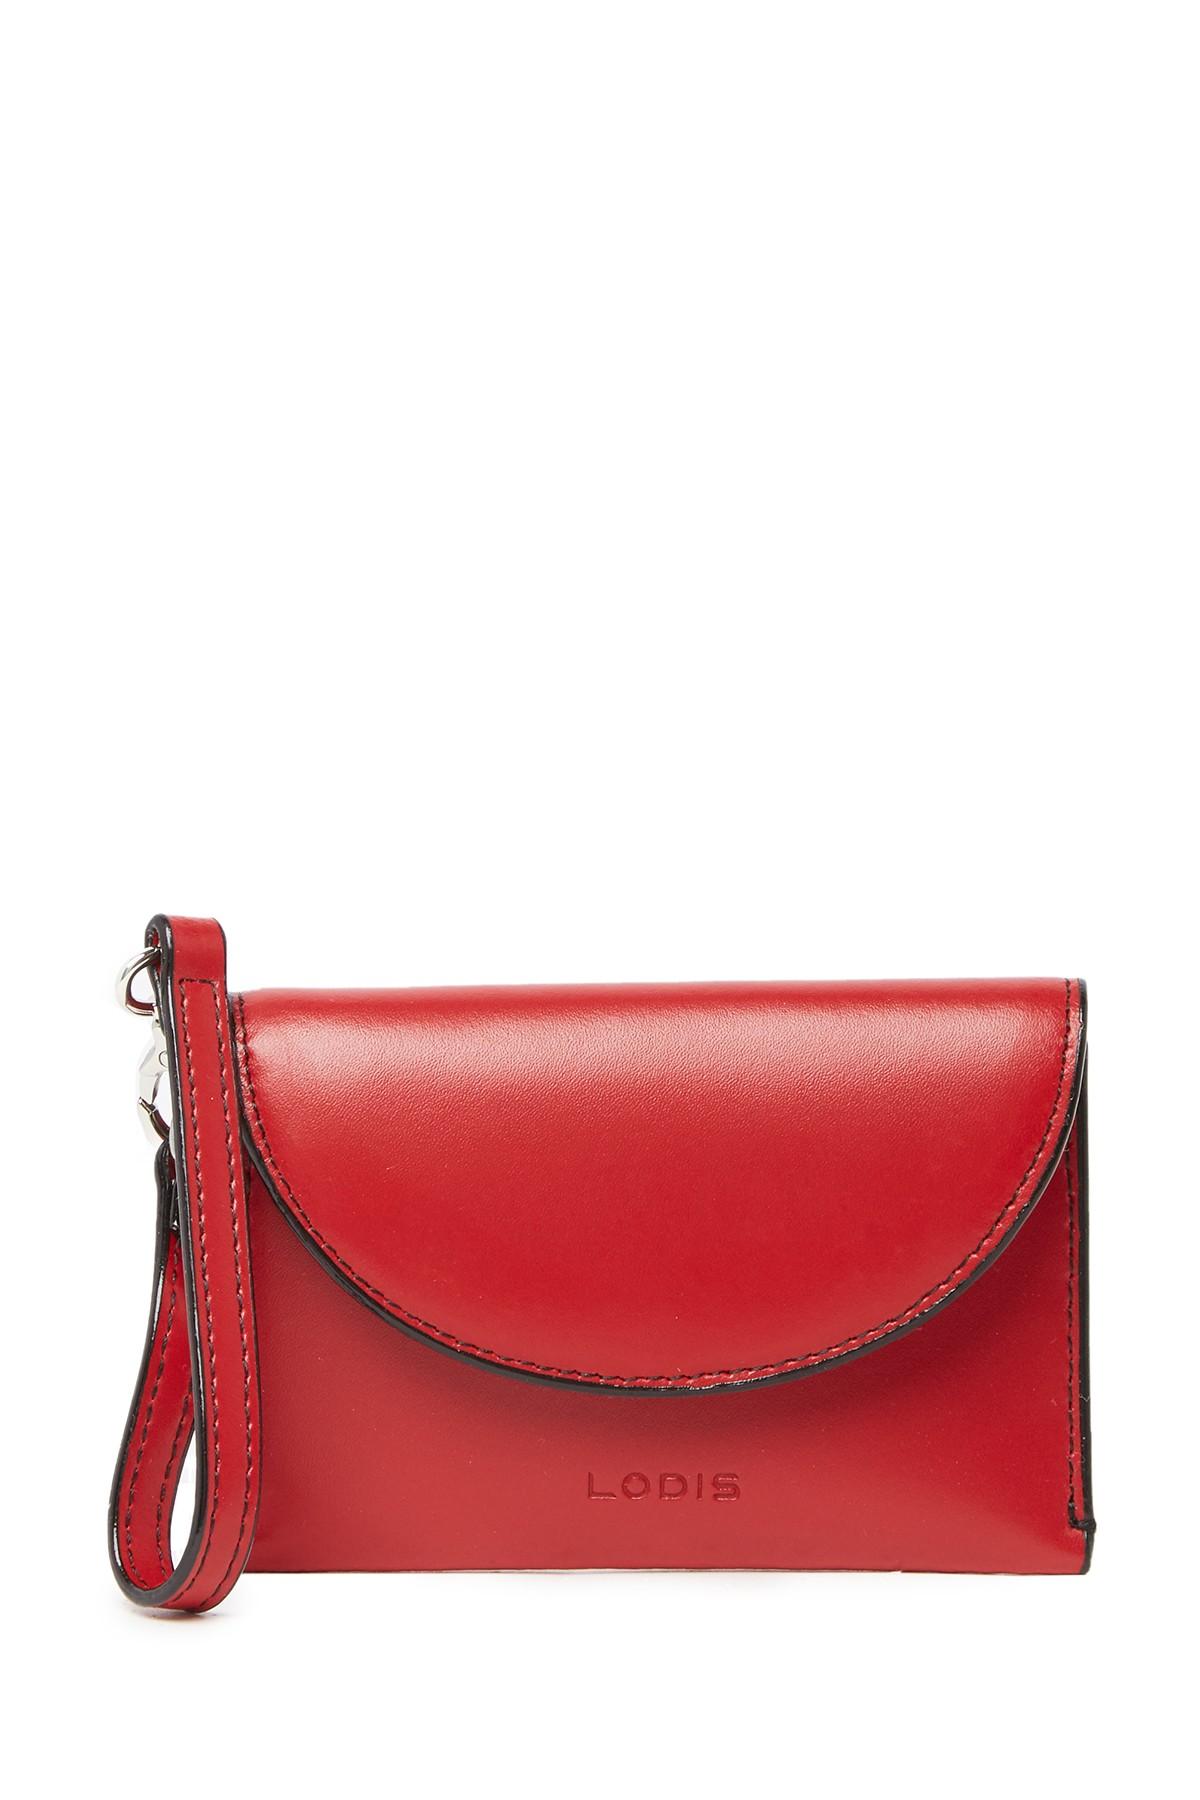 Lodis Audry Key Chain Wristlet Card Pouch in Red - Lyst